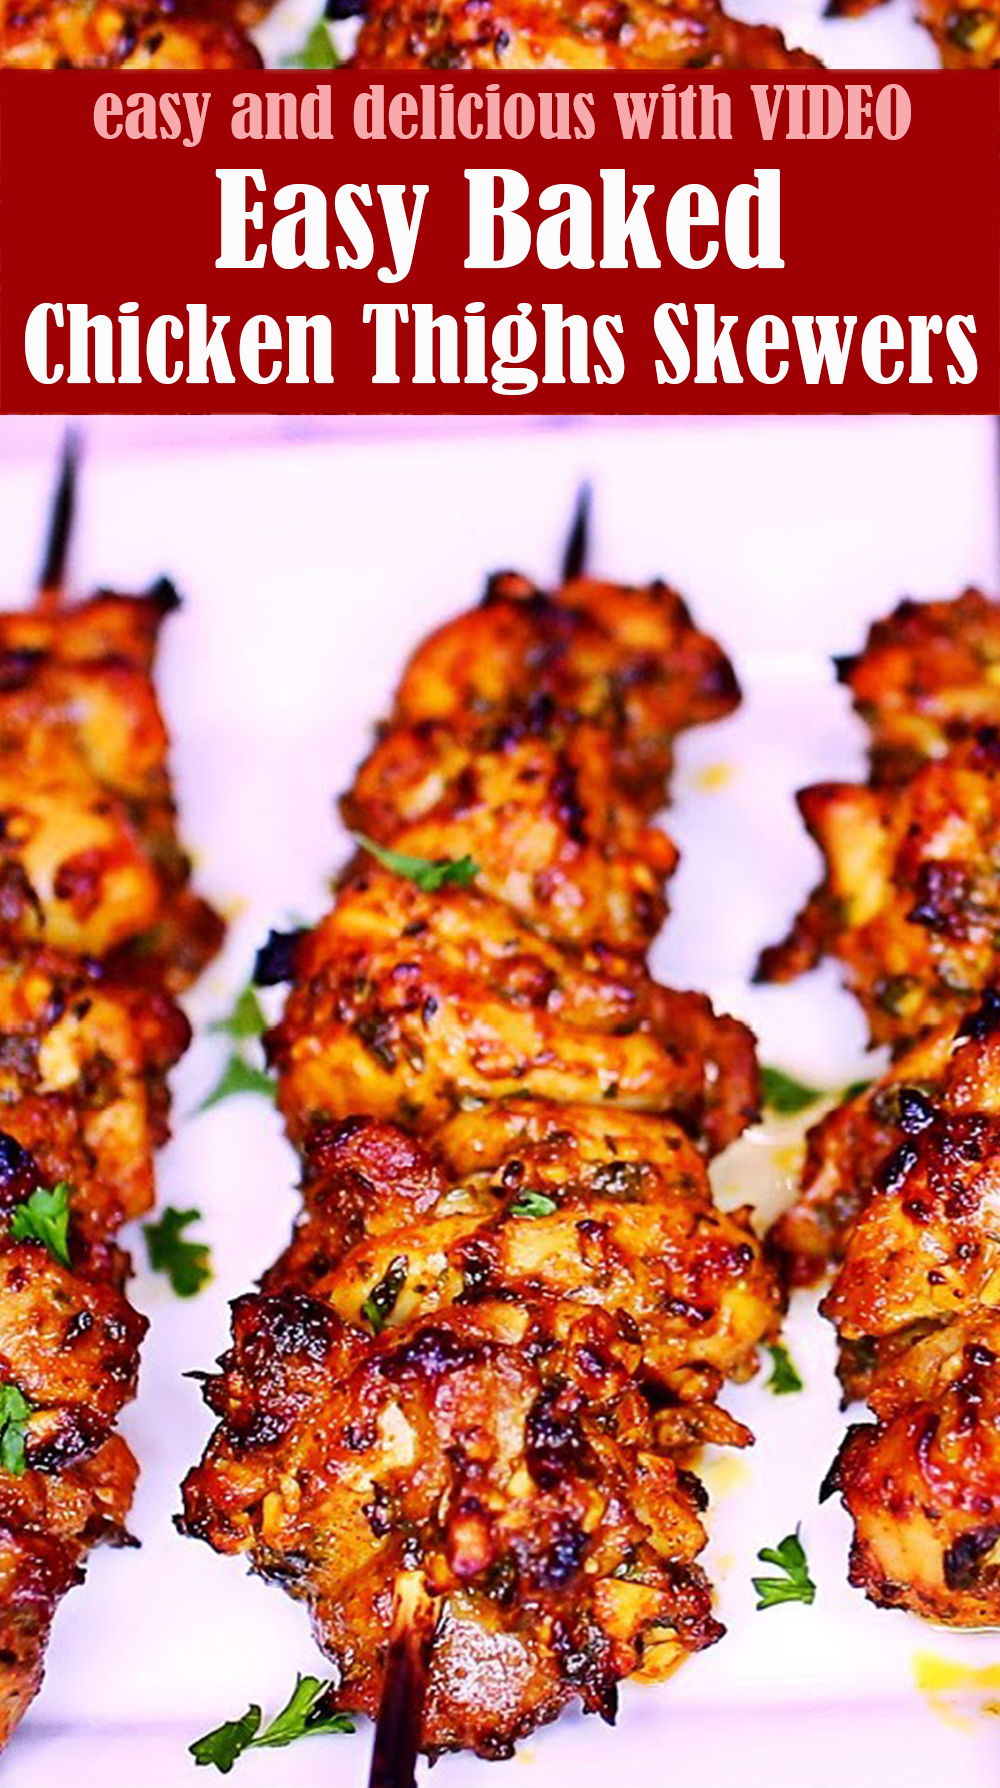 Easy Baked Chicken Thighs Skewers